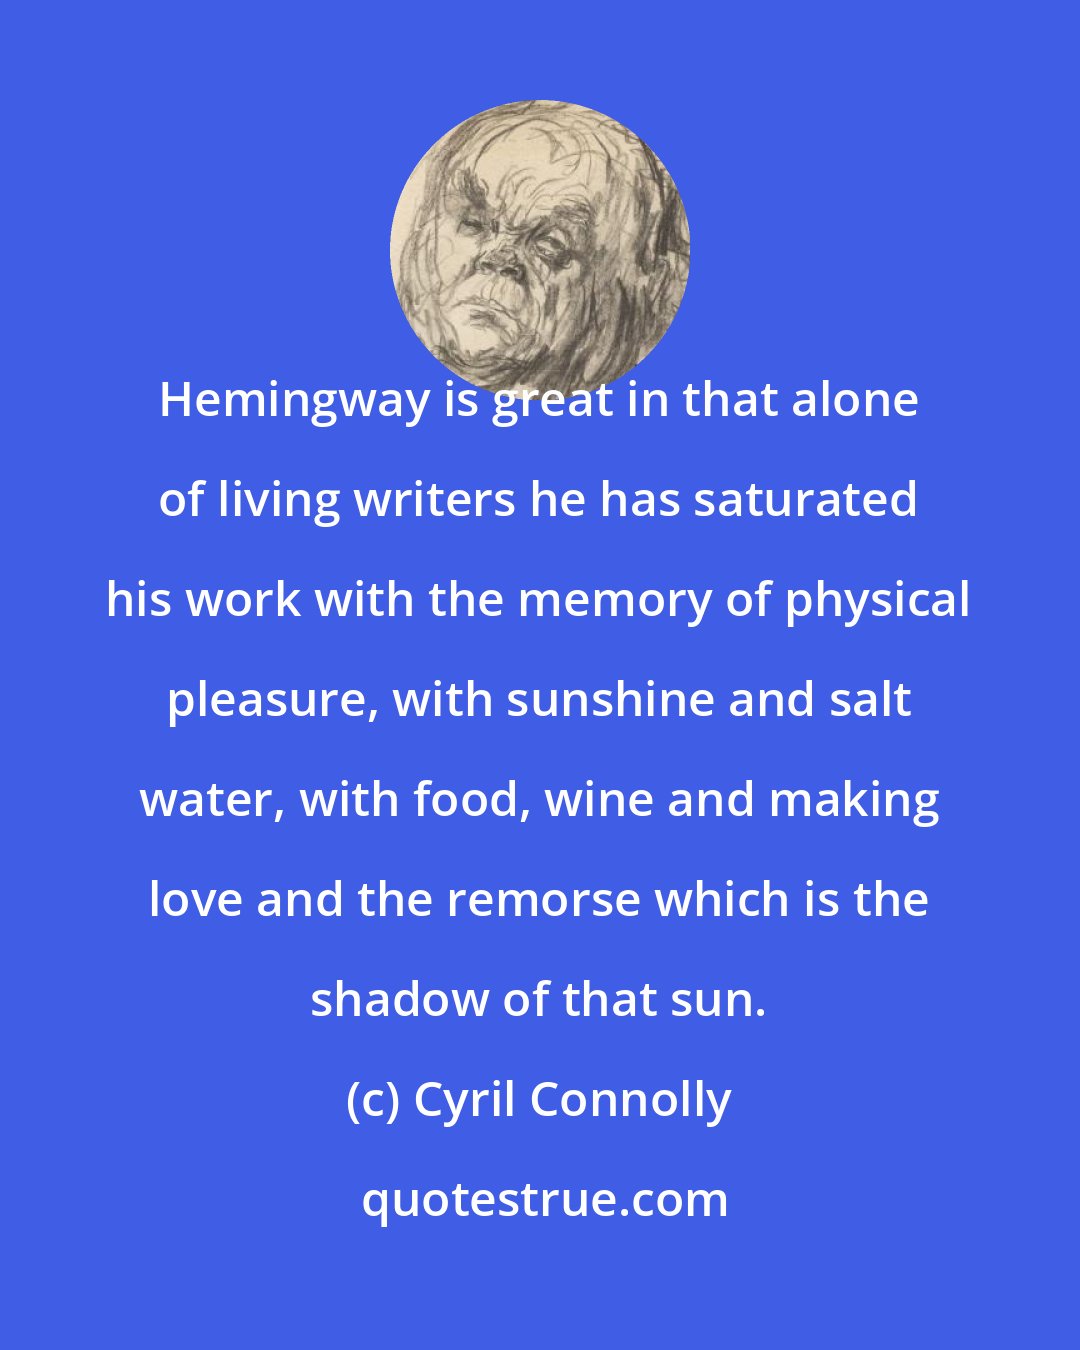 Cyril Connolly: Hemingway is great in that alone of living writers he has saturated his work with the memory of physical pleasure, with sunshine and salt water, with food, wine and making love and the remorse which is the shadow of that sun.